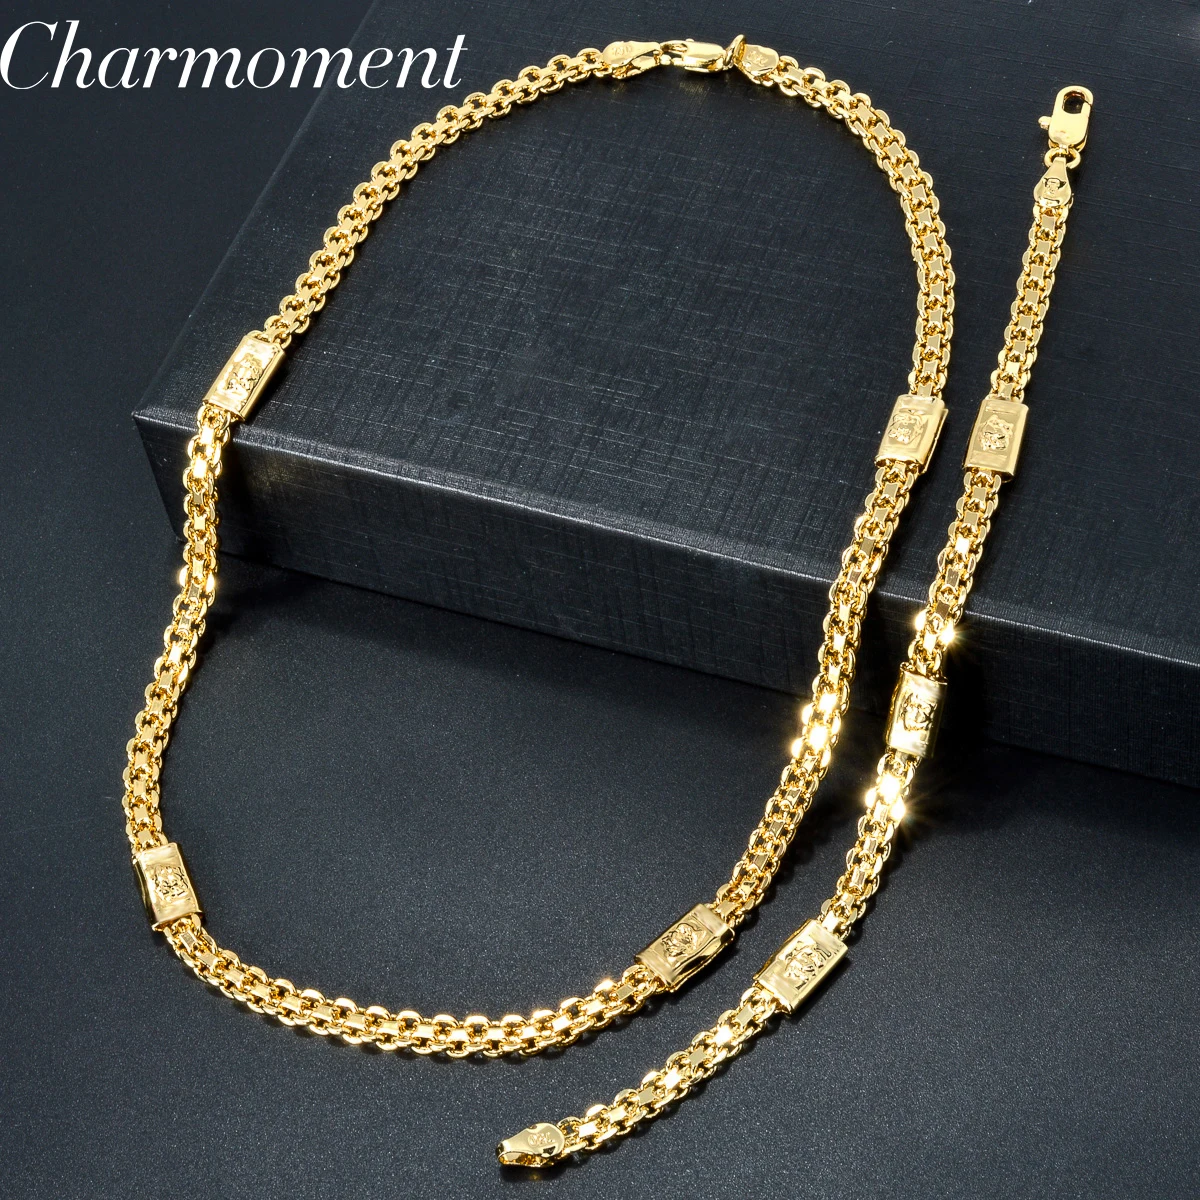 Luxury 18k Gold Color 7mm Chain for Men Women Bracelet Necklace Jewelry Set Fashion Party Christma Gifts Jewelry Accessories